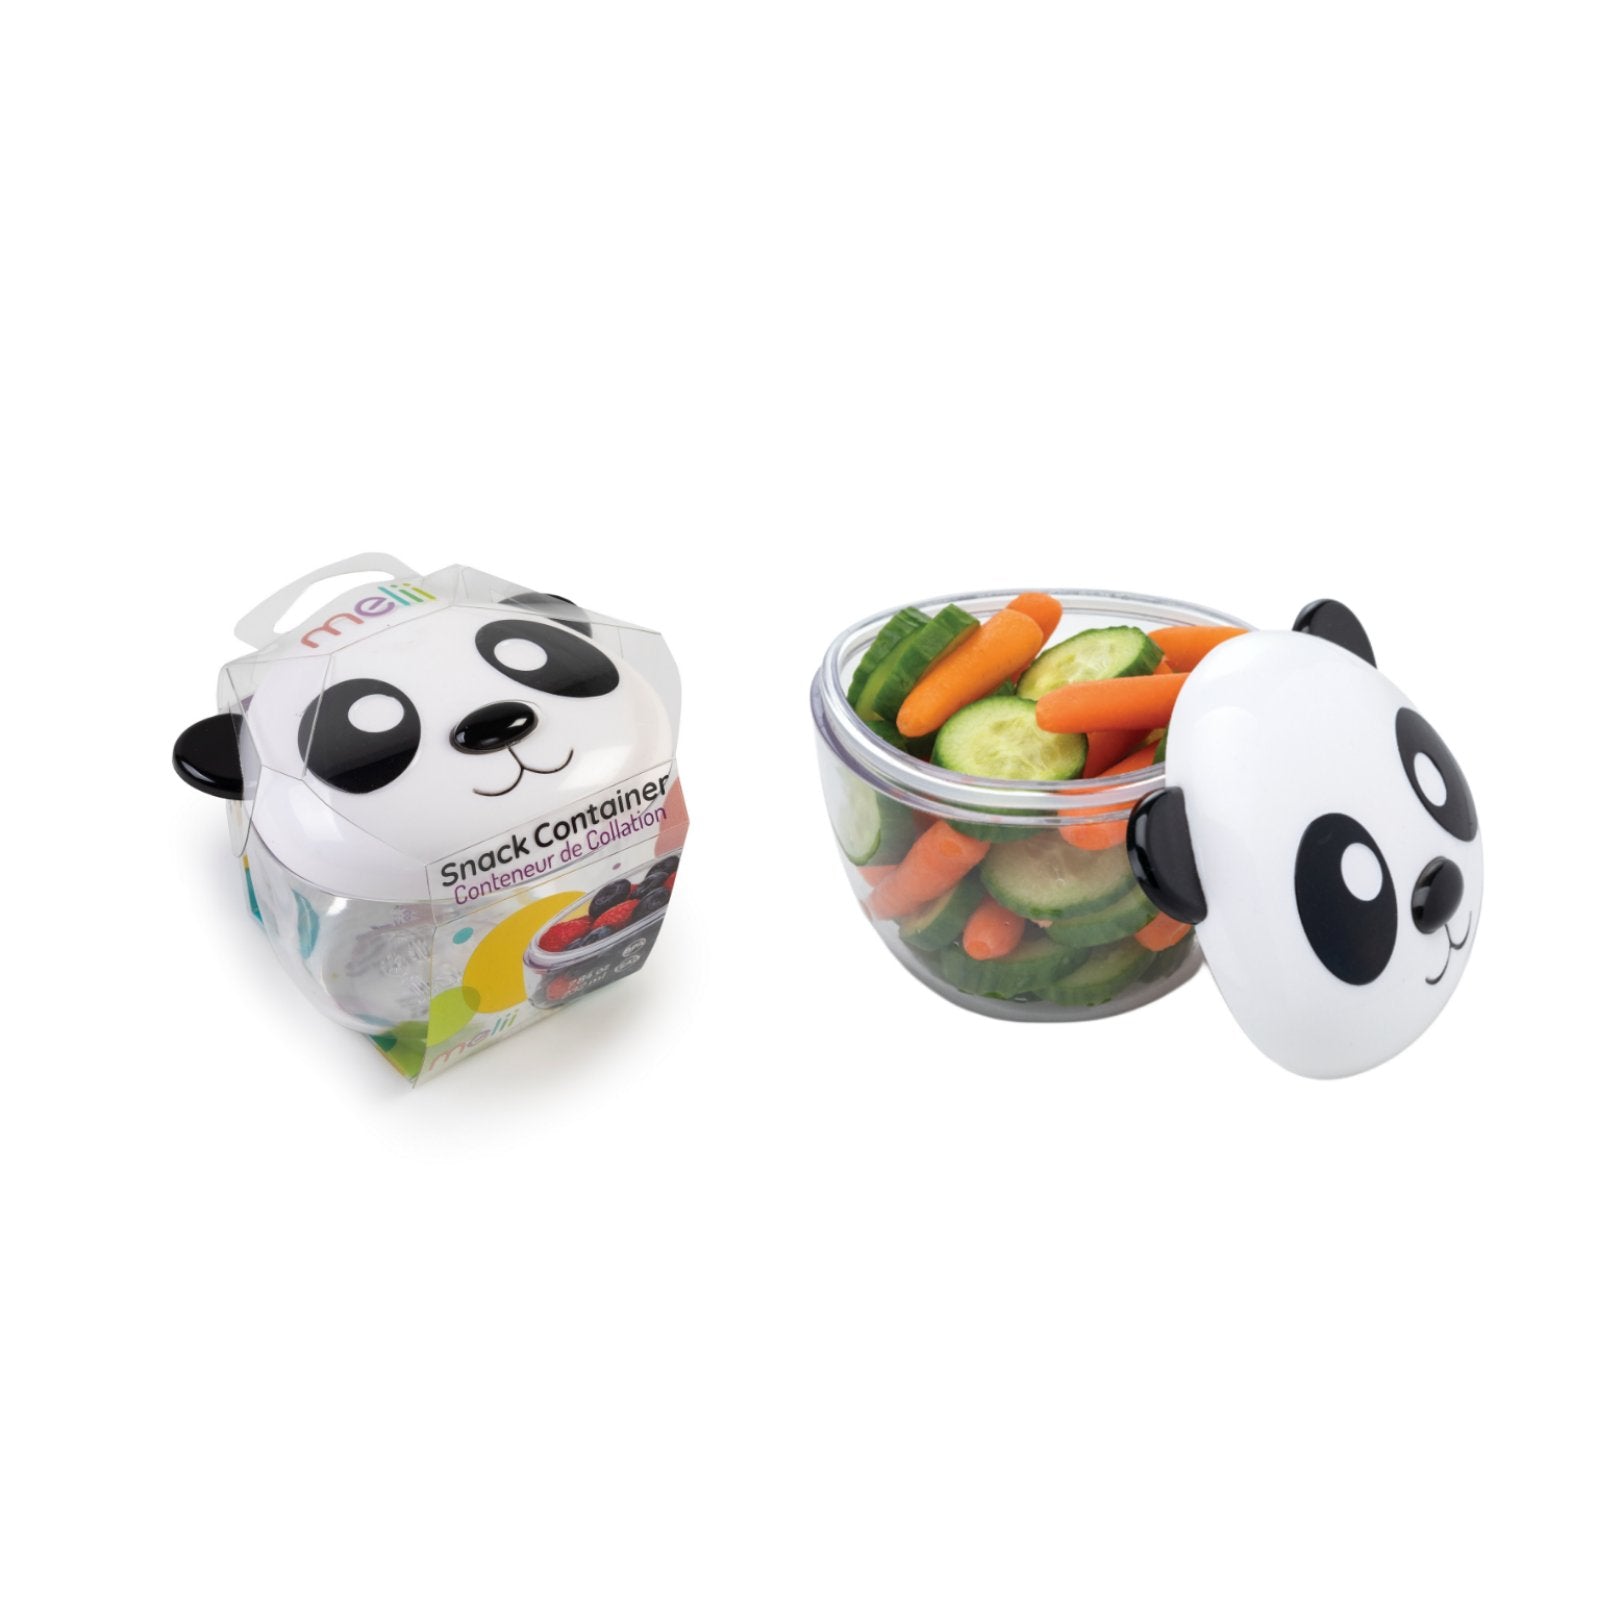 Melii Lion Snack Container